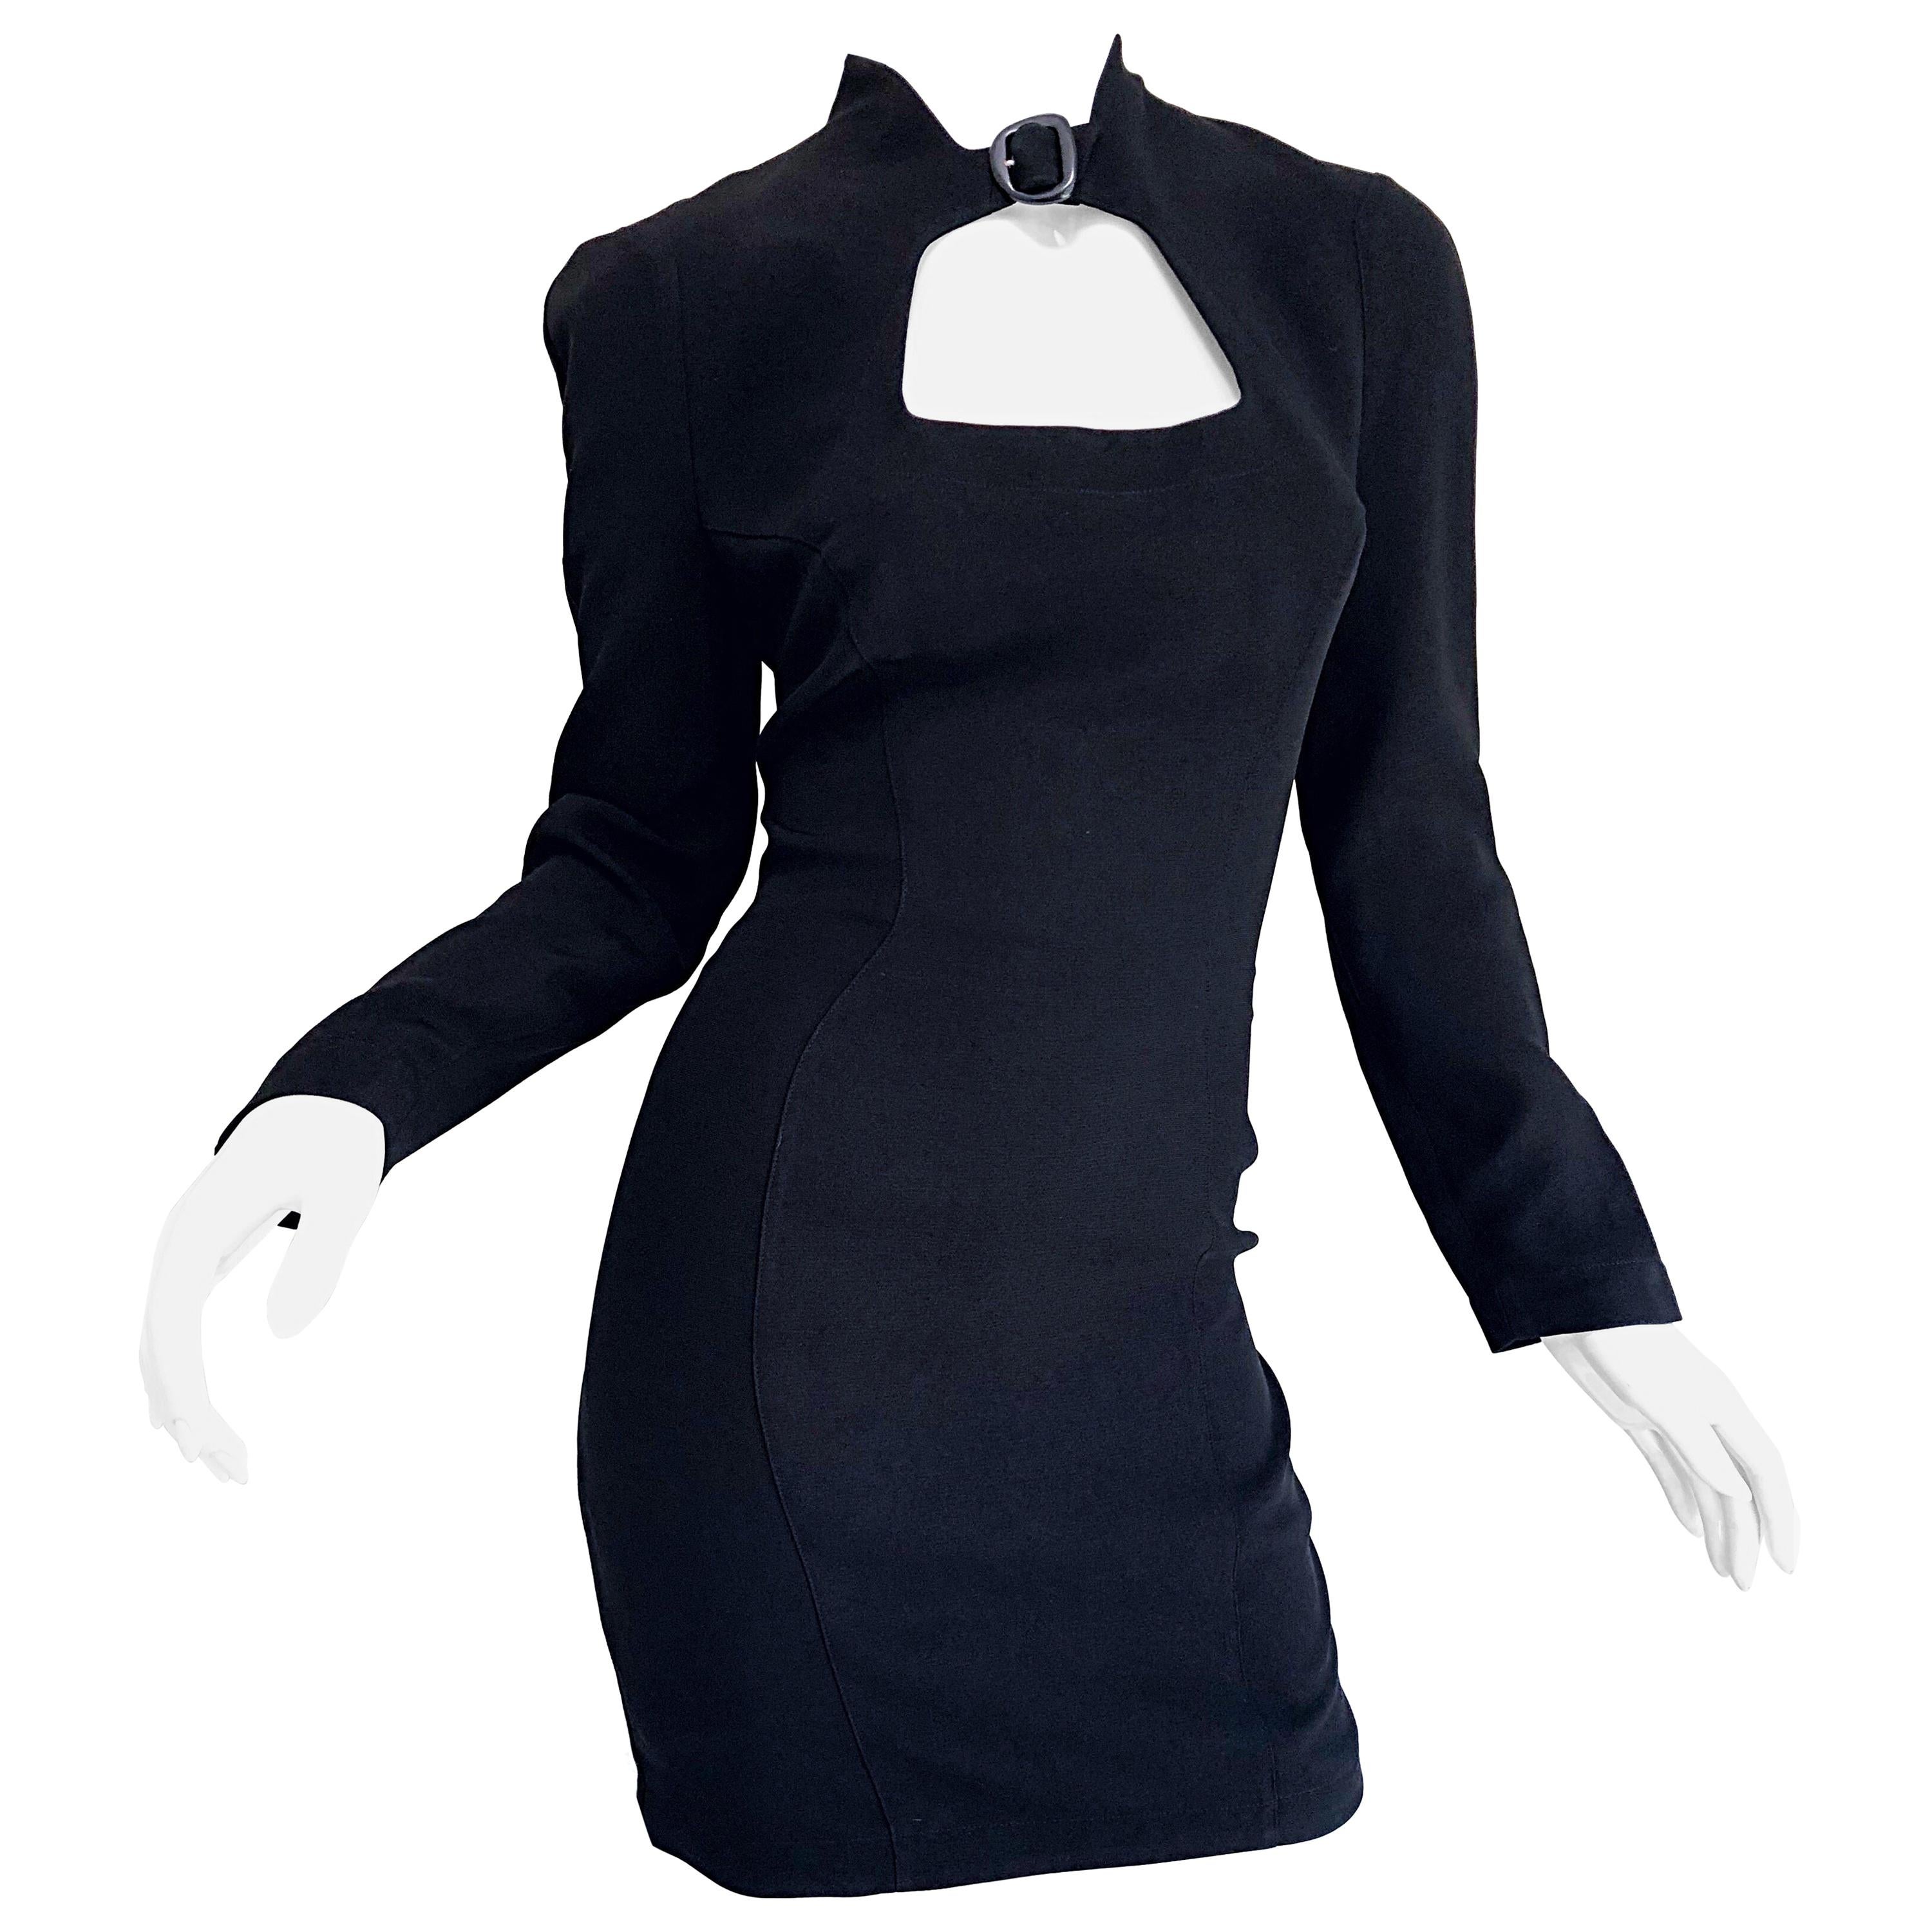 Iconic Vintage Thierry Mugler 80s Bondage Inspired Cut - Out Black 1980s Dress For Sale